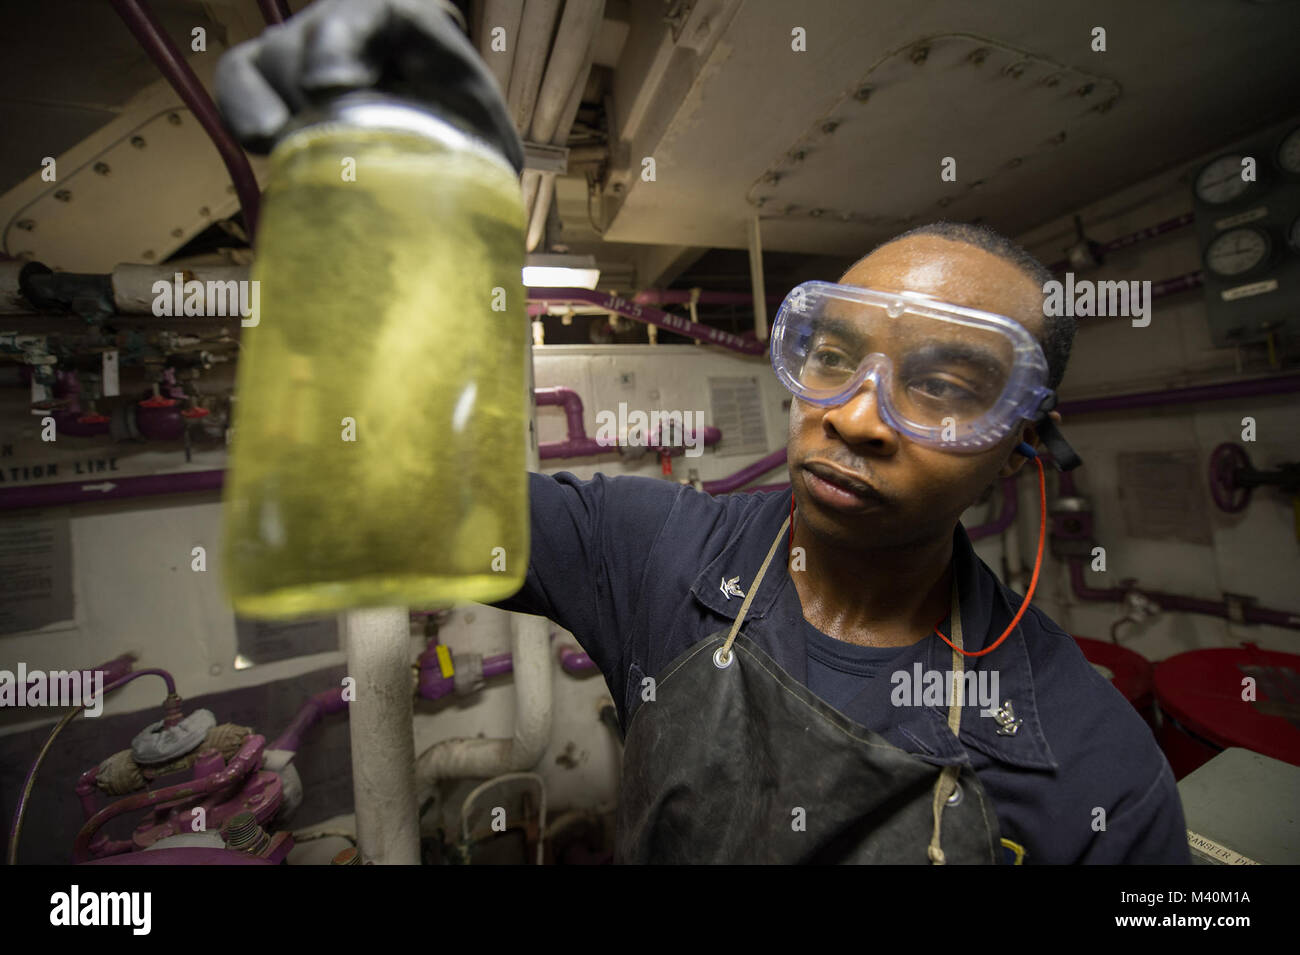 150521-N-IG780-018 PACIFIC OCEAN (May 21, 2015) — Gas Turbine System Technician (Mechanical) 3rd Class Terrence Brooks inspects a jar of JP-5 fuel for impurities prior to refueling an SH-60B 'Seahawk' helicopter on board guided-missile frigate USS Kauffman (FFG 59). Kauffman is currently underway in support of Operation Martillo, a joint operation with the U.S. Coast Guard and partner nations within the 4th Fleet area of responsibility. (U.S. Navy photo by Mass Communication Specialist 3rd Class Shane A. Jackson/Released) 150521-N-IG780-018 by U.S. Naval Forces Southern Command  U.S. 4th Fleet Stock Photo